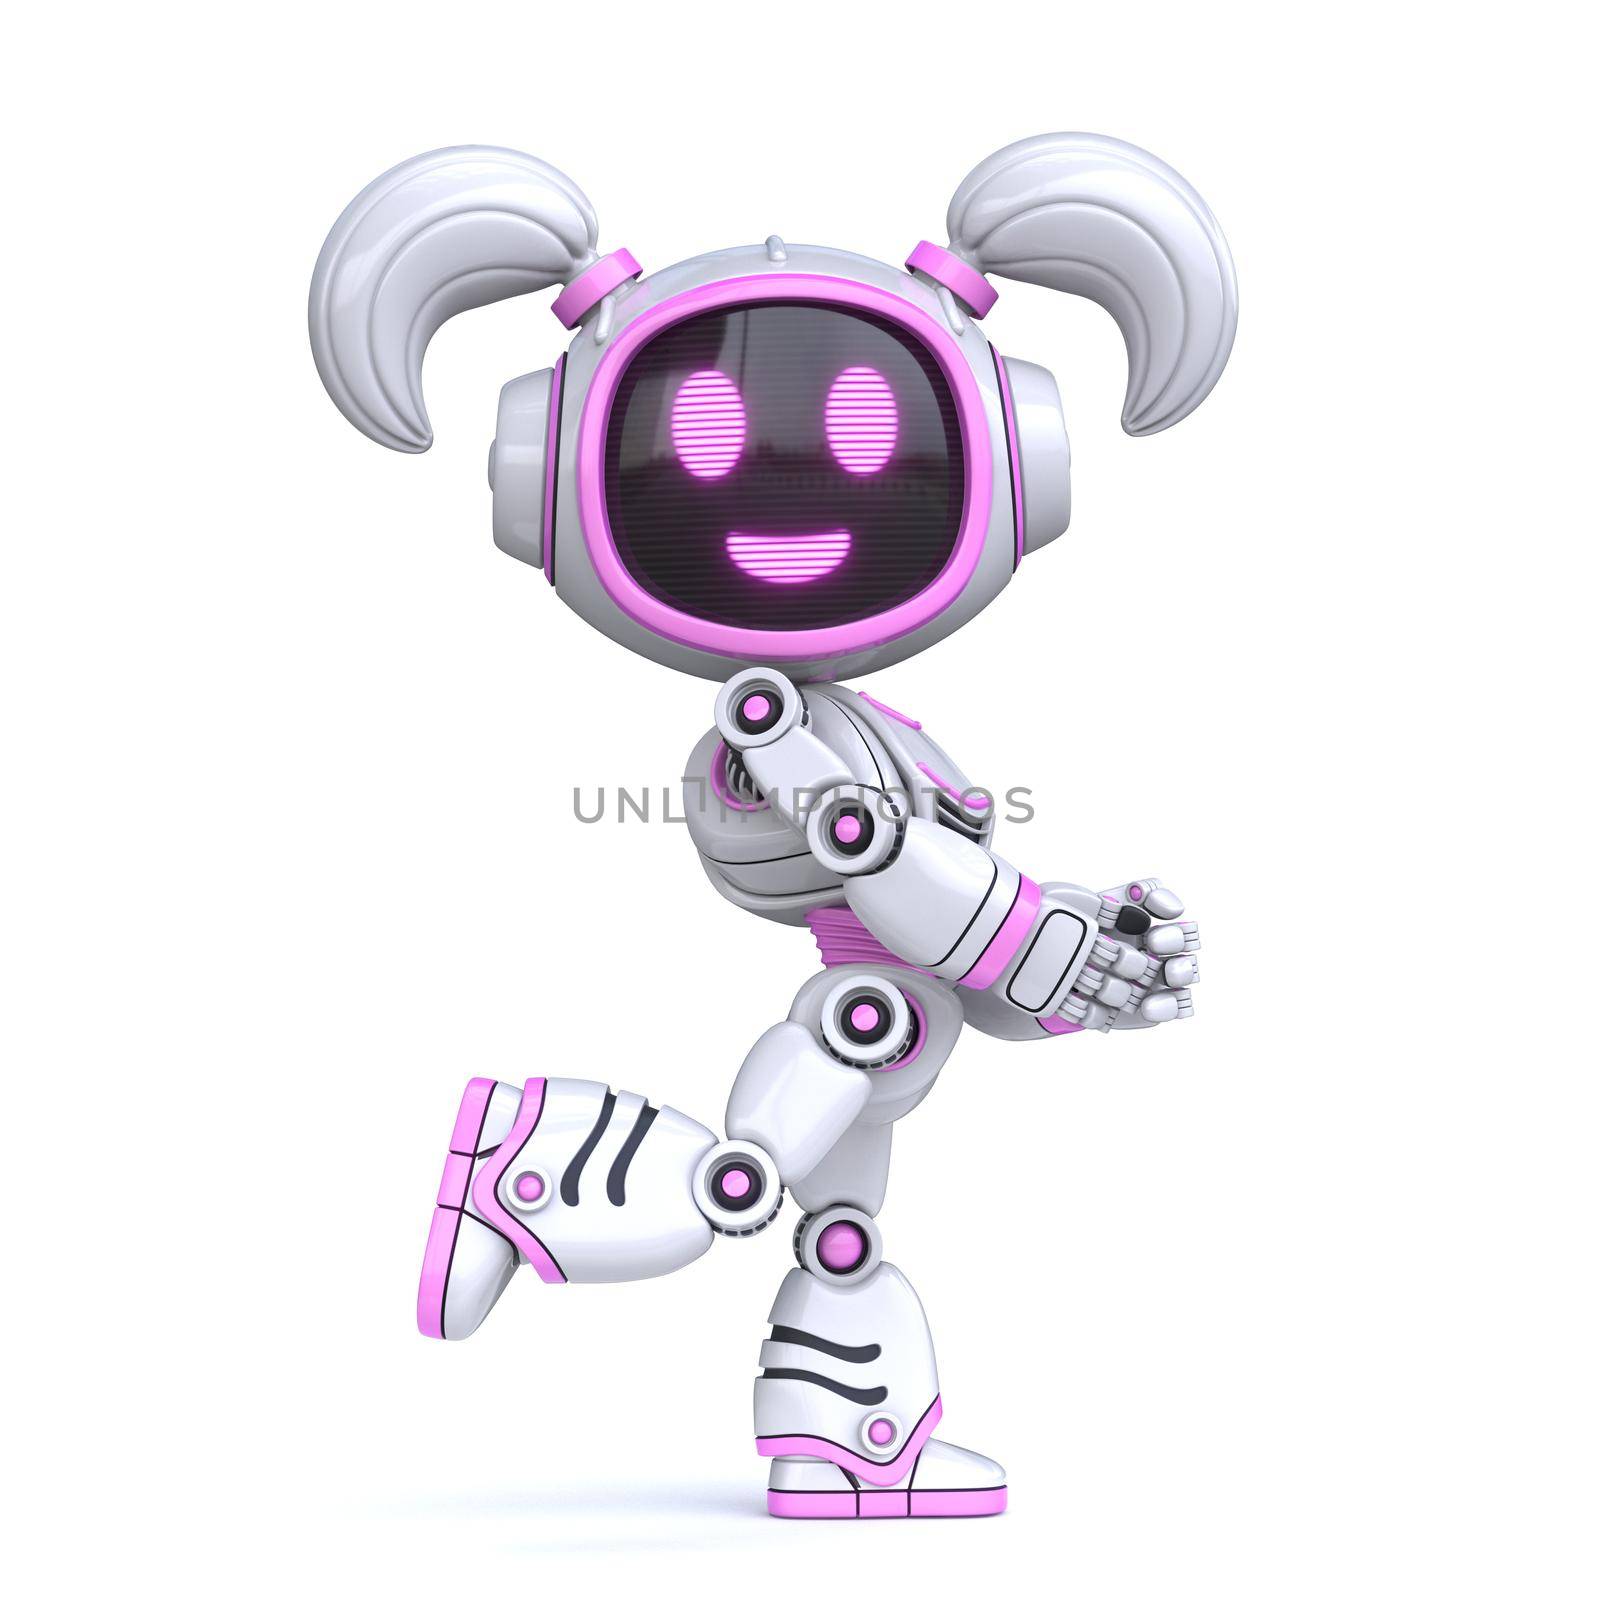 Cute pink girl robot posing 3D rendering illustration isolated on white background